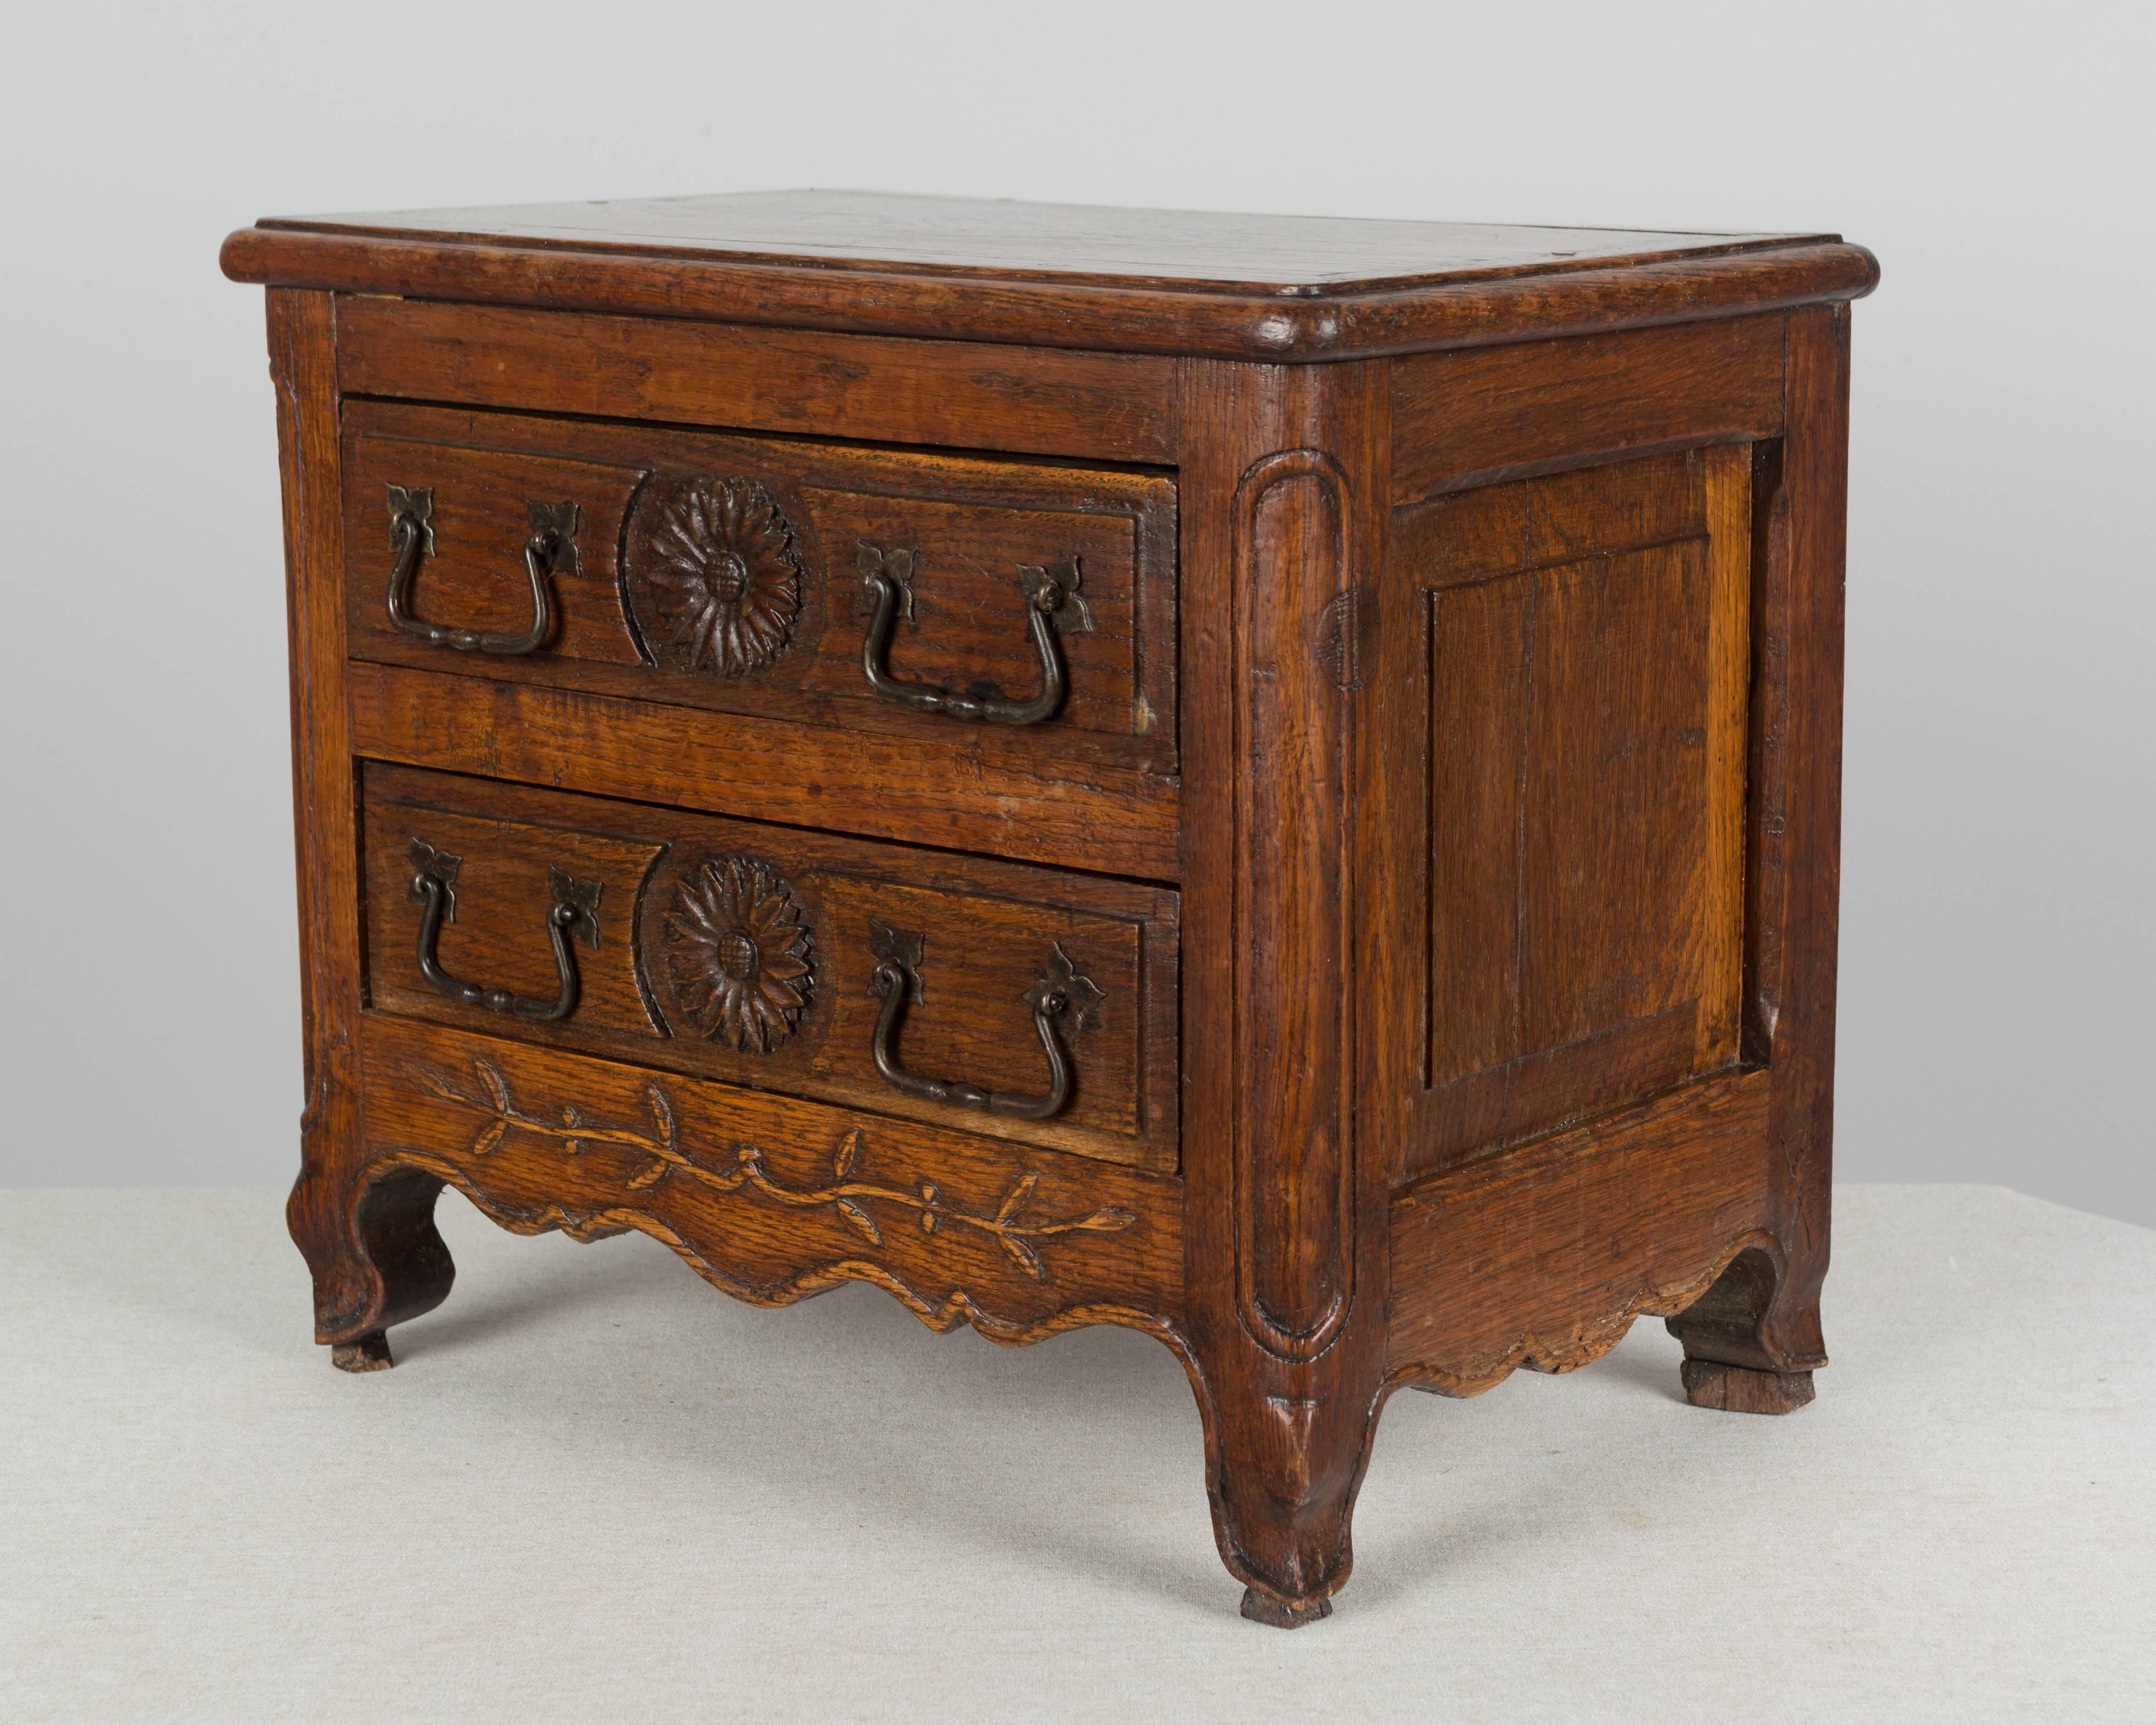 19th century Louis XV style Country French miniature commode made of solid oak. Simple hand-carved decoration of sunflowers on the drawers and a vine on the apron. Original hardware. Waxed patina. A good small chest, heavy for its size, with nice